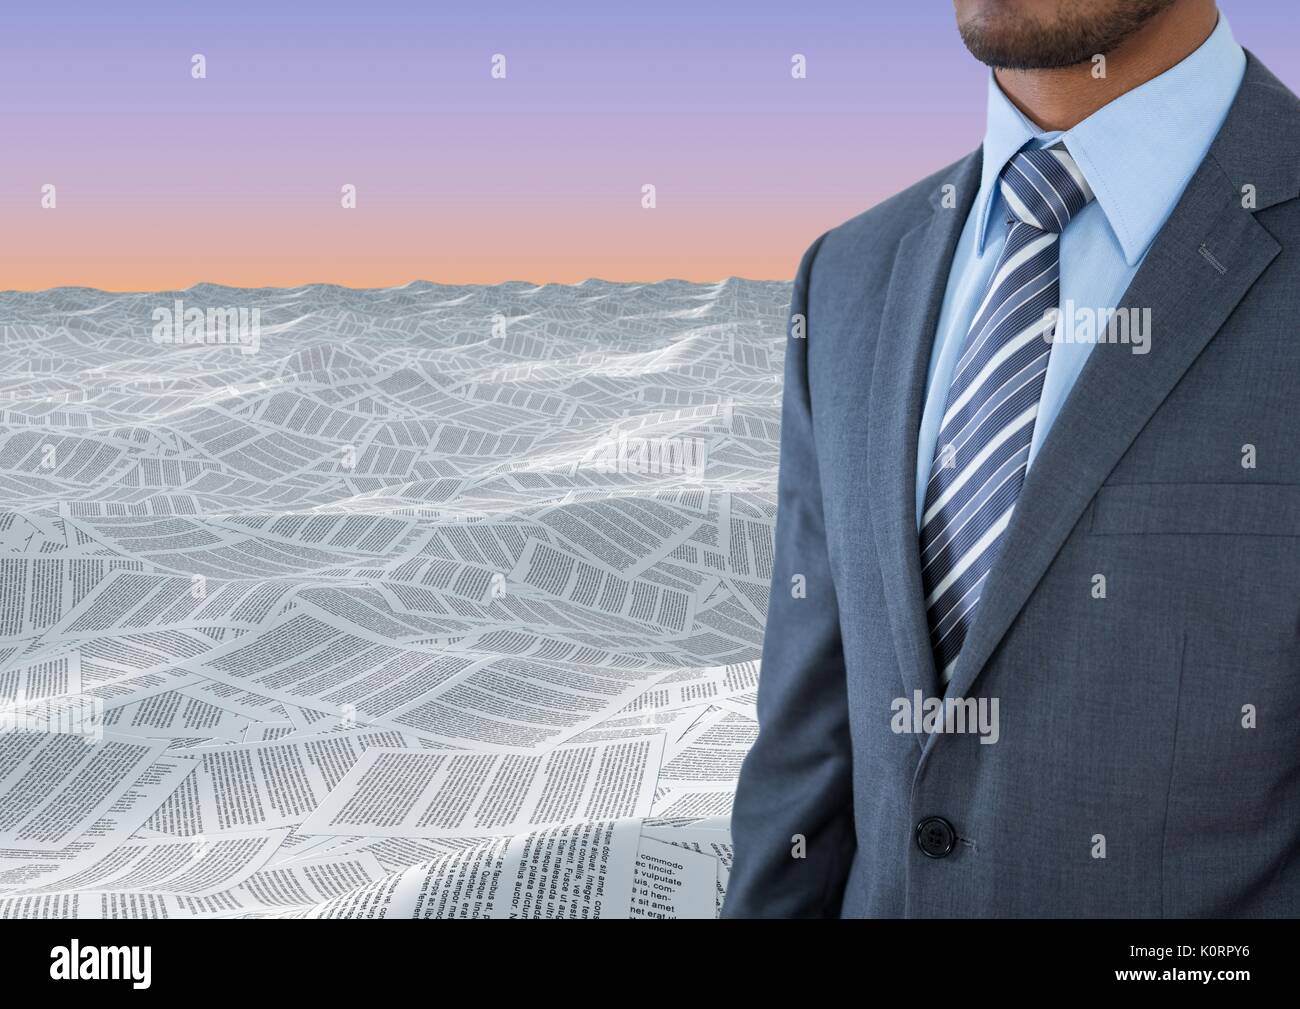 Digital composite of Businessman in sea of documents under sky Stock Photo